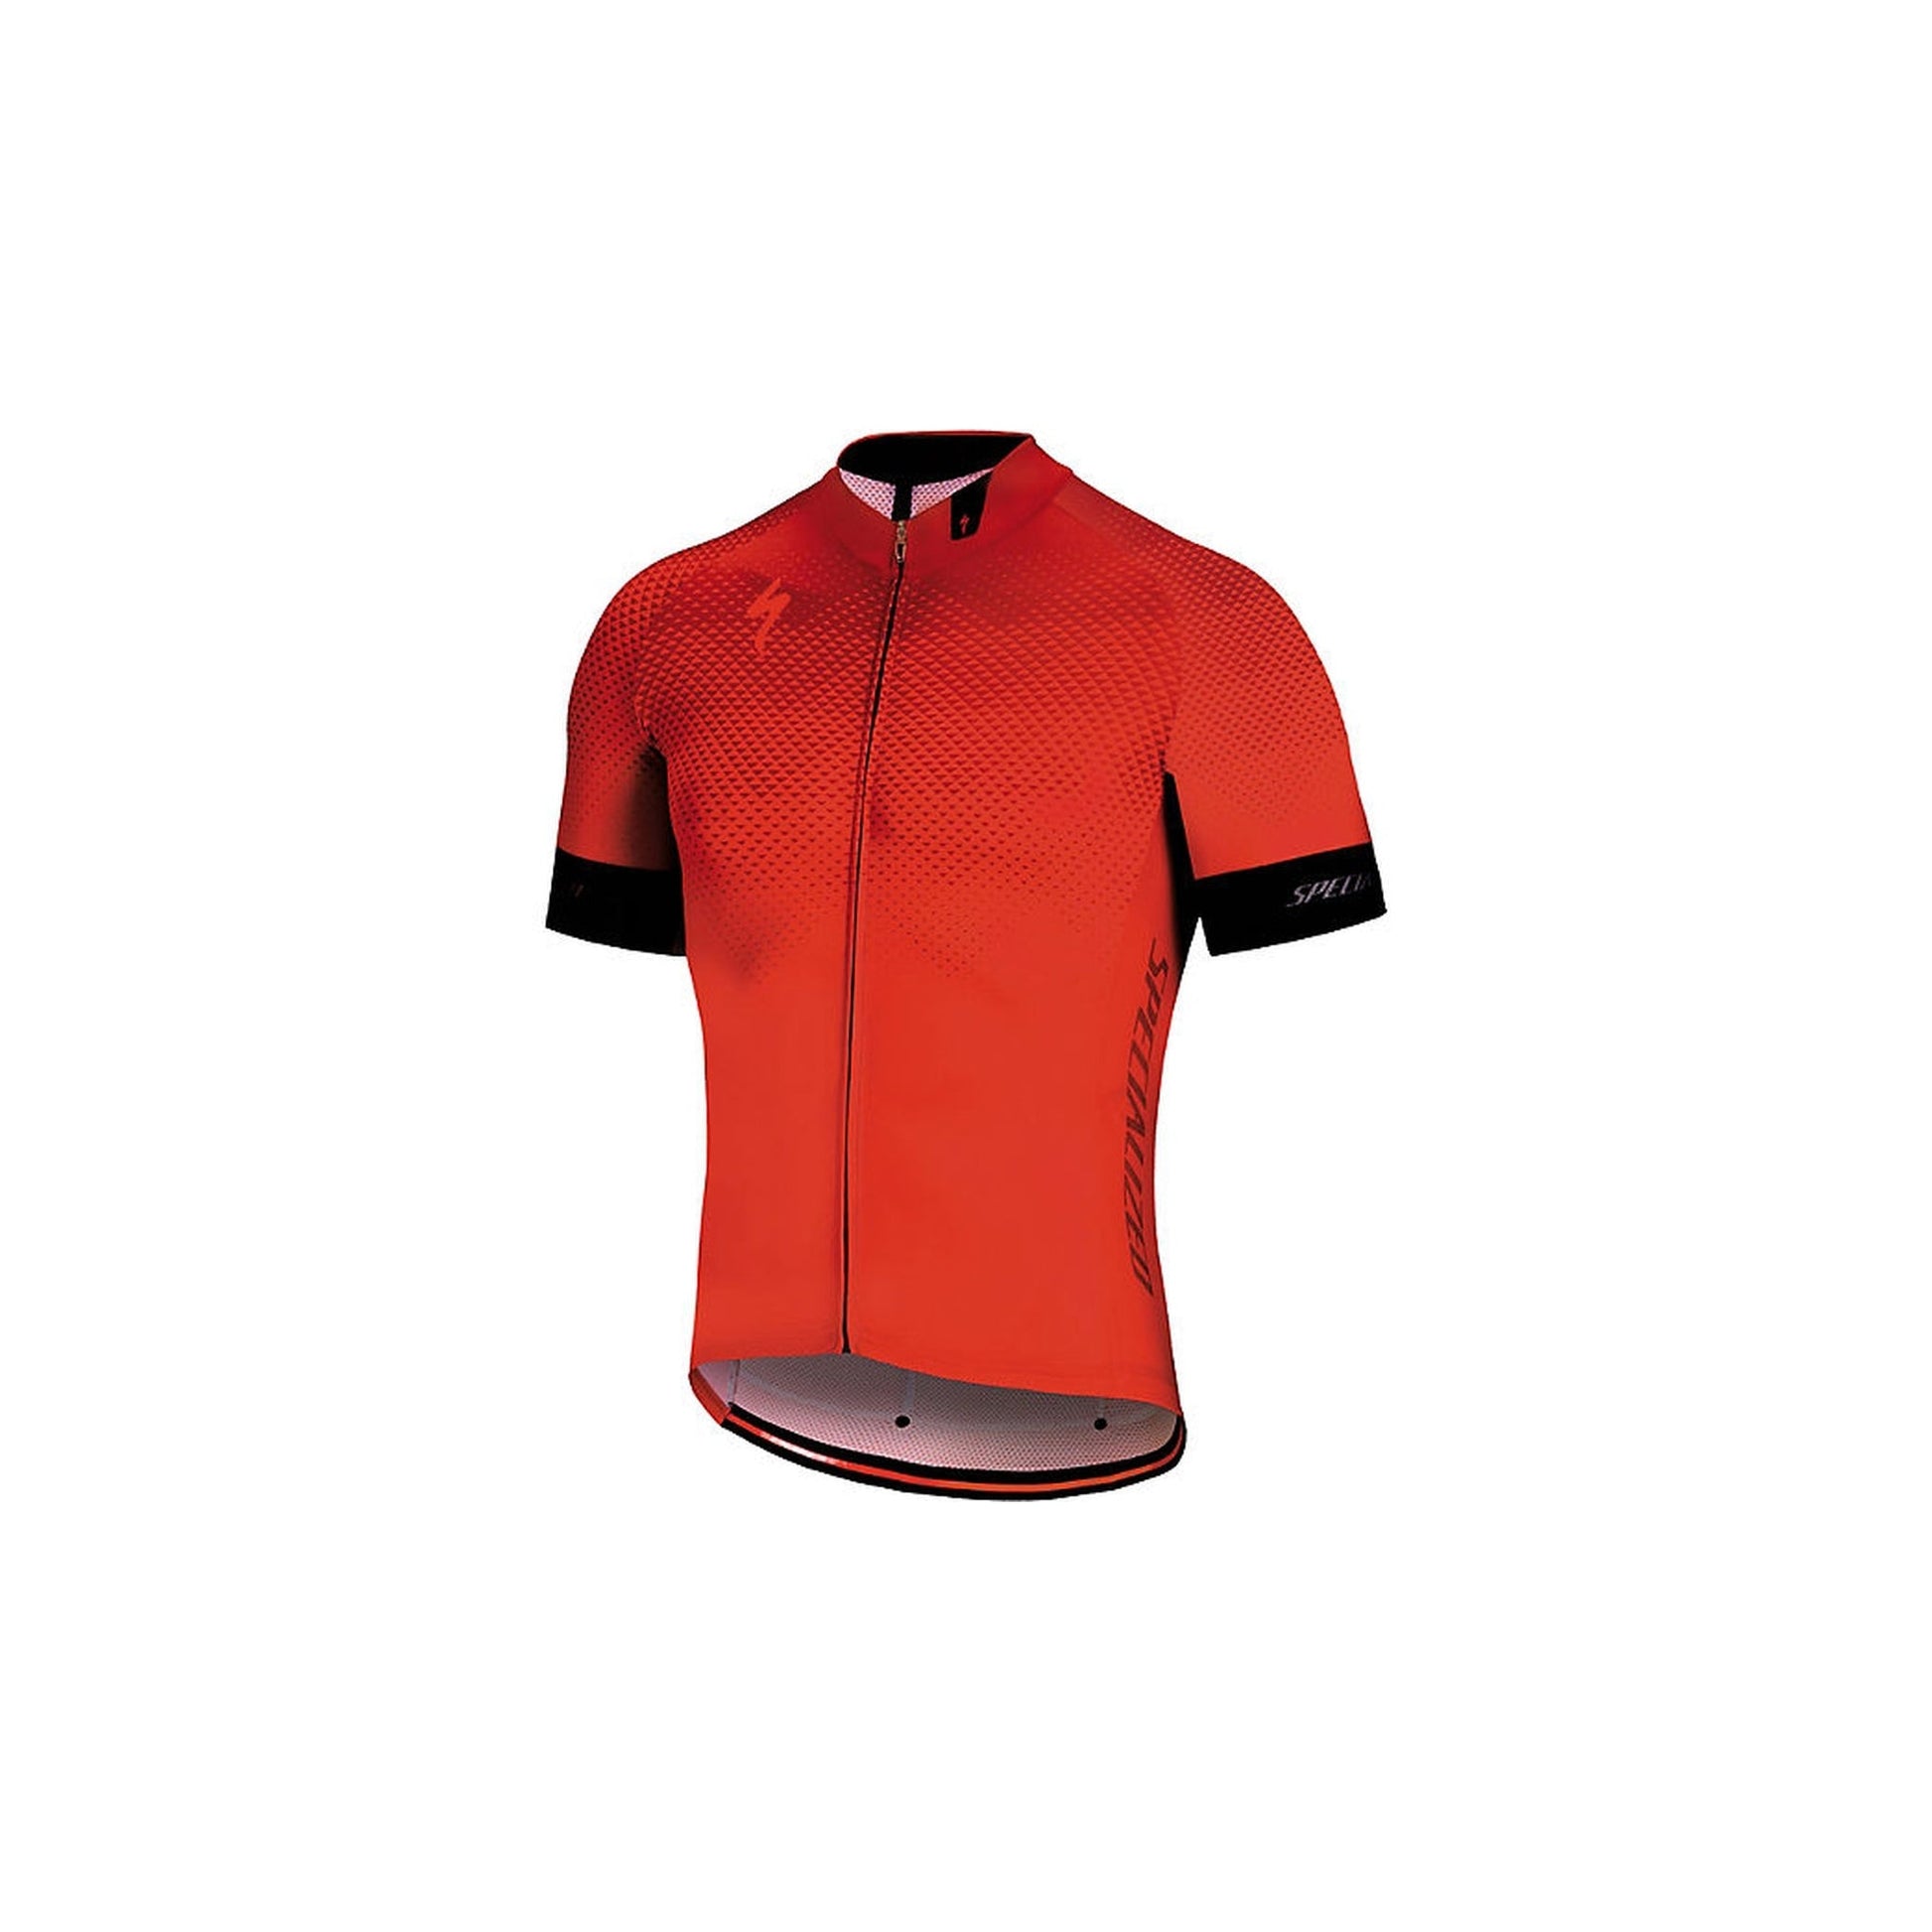 SL Pro SS Jersey-Cycles Direct Specialized